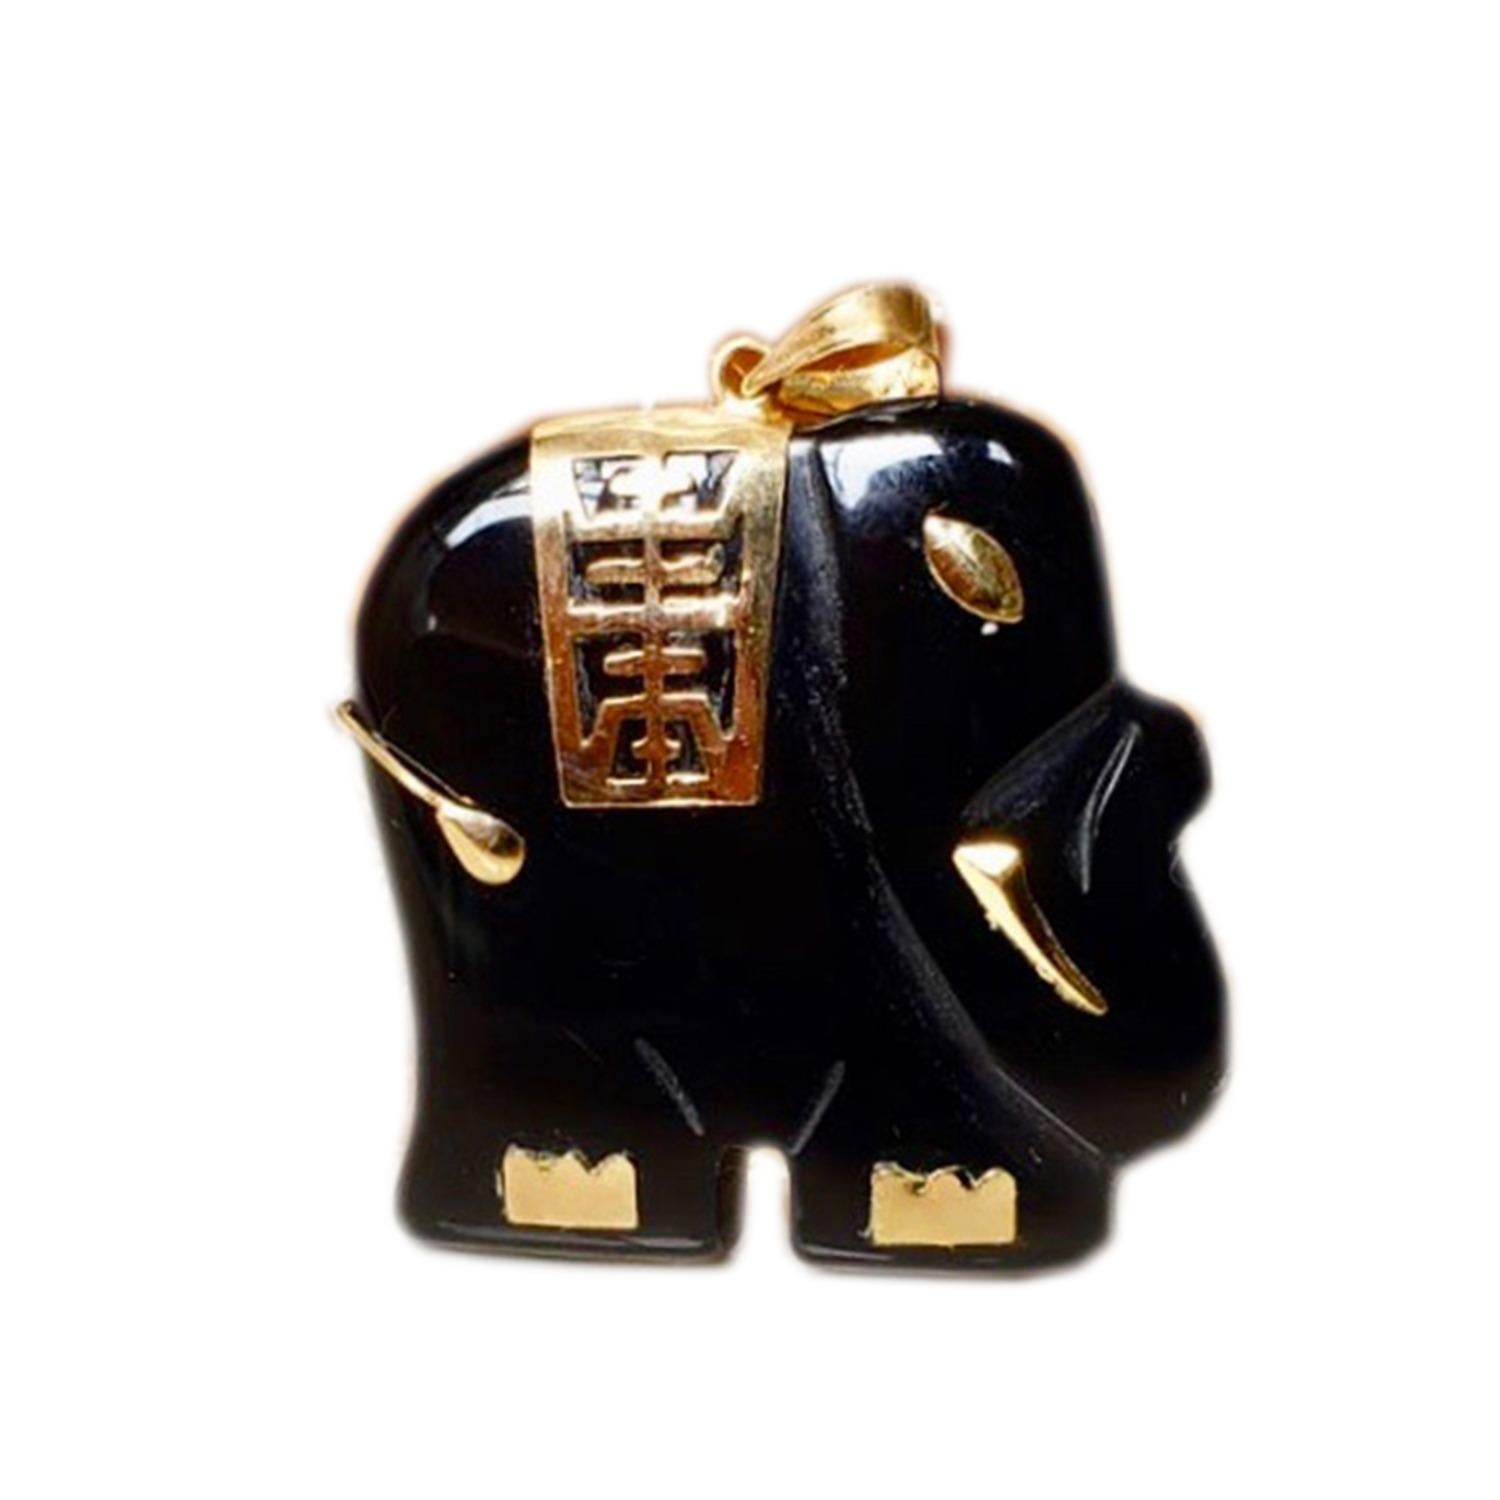 Handmade in Hong Kong by expert crafters, we intertwine ancient oriental techniques with modern design. Our Black Onyx and 14K Yellow Gold accents make for pleasing contrast and effects. 

A Symbol of authority and elegance, Elephants signify joy